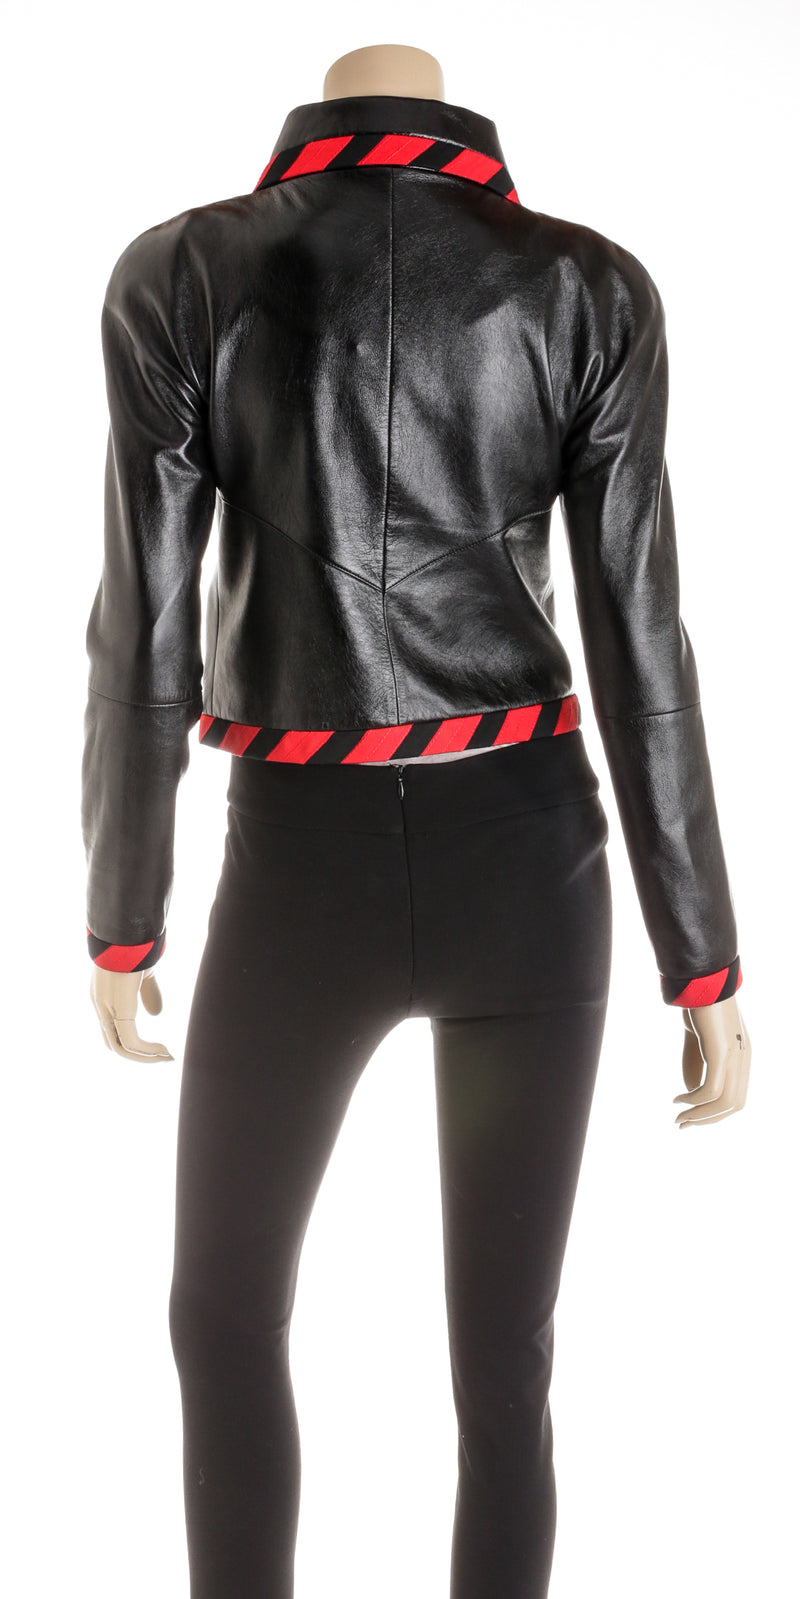 Chanel Black Leather Red Trim Motorcycle Jacket Size 36 Spring 2020 Collection